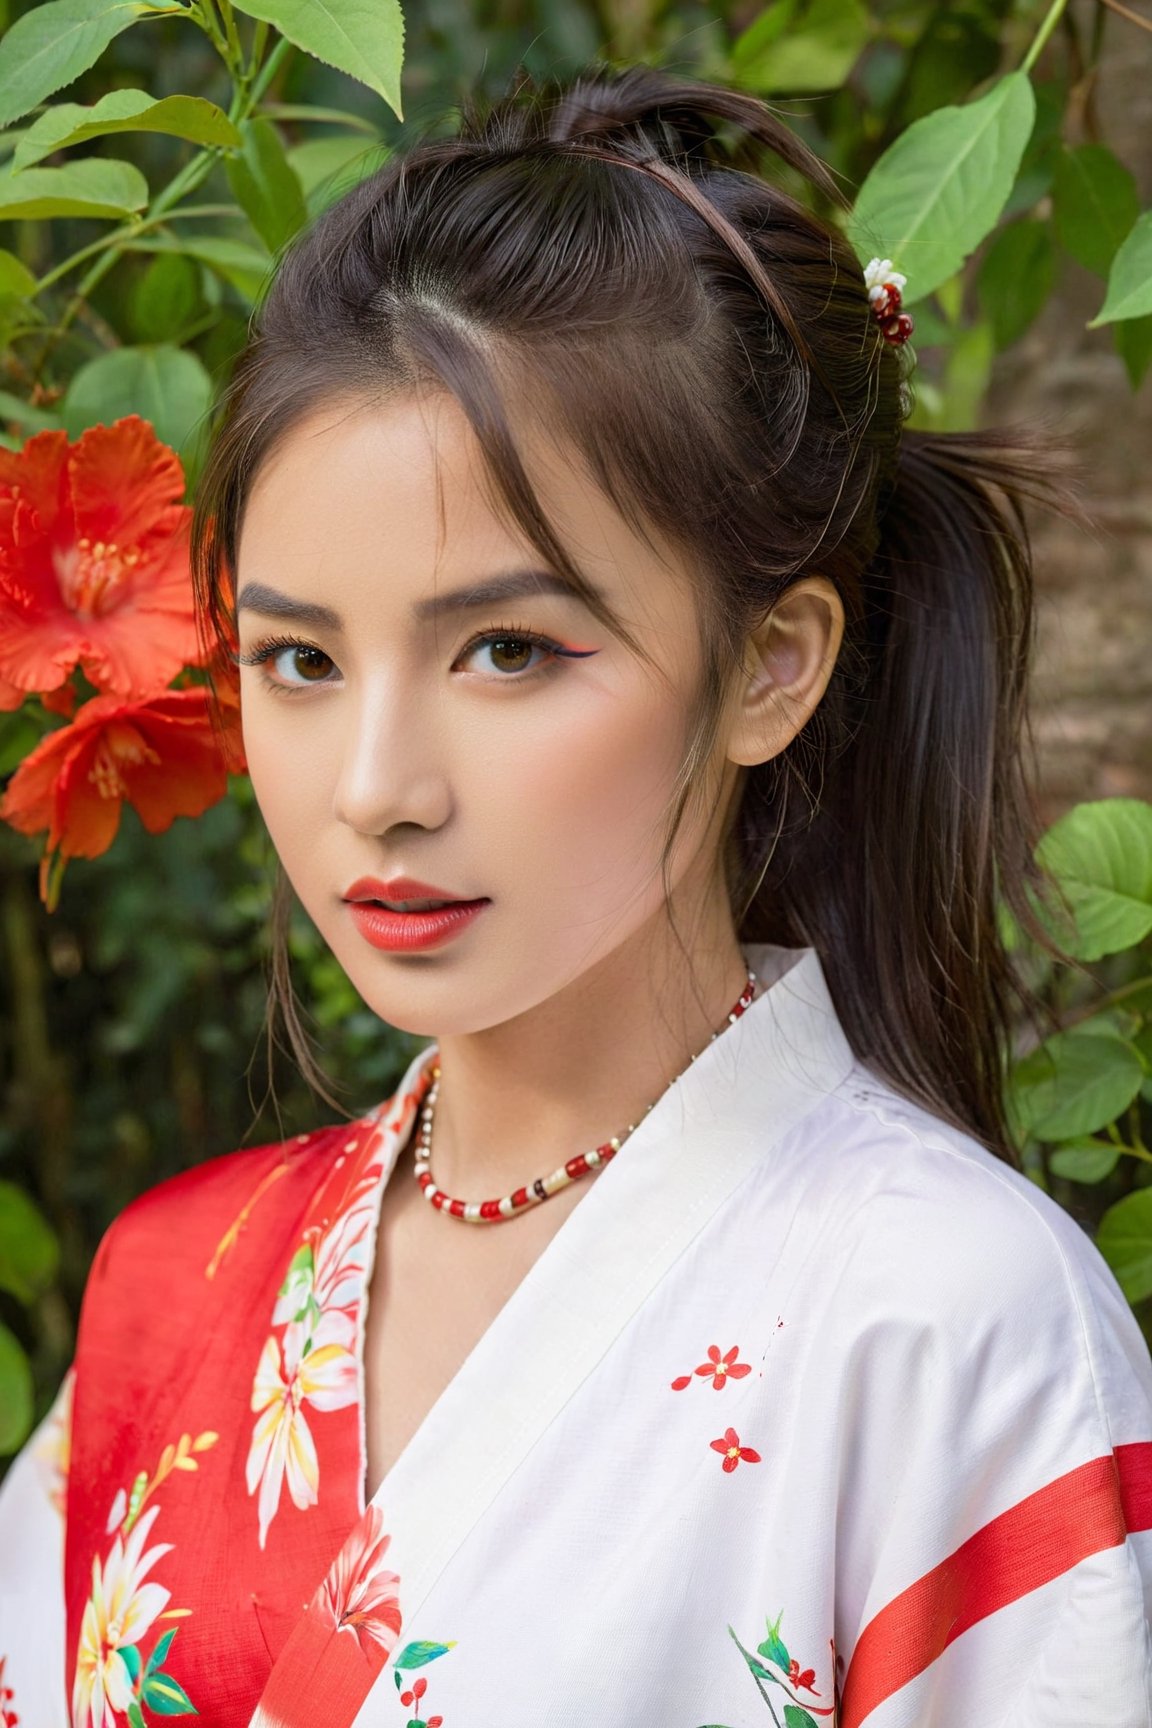 1girl, beautiful detailed eyes, beautiful detailed lips, extremely detailed eyebrows and face, long eyelashes, stripe bead necklace, black hair styled in a spiked ponytail, wearing a simple kimono with red open clothes. The artwork is created using oil paint on canvas, with high resolution and ultra-detailed brushstrokes. The painting showcases a picturesque garden scene with vibrant colors and vivid flowers in full bloom. The girl is depicted standing gracefully amidst the floral landscape, her posture conveying a sense of tranquility and elegance. The lighting in the painting is soft and ethereal, casting gentle shadows on the girl's face and adding depth to the overall composition. The color palette is dominated by various shades of red, creating a warm and inviting atmosphere. The art style blends elements of traditional Japanese art with a touch of contemporary flair, resulting in a captivating fusion of East-meets-West aesthetics